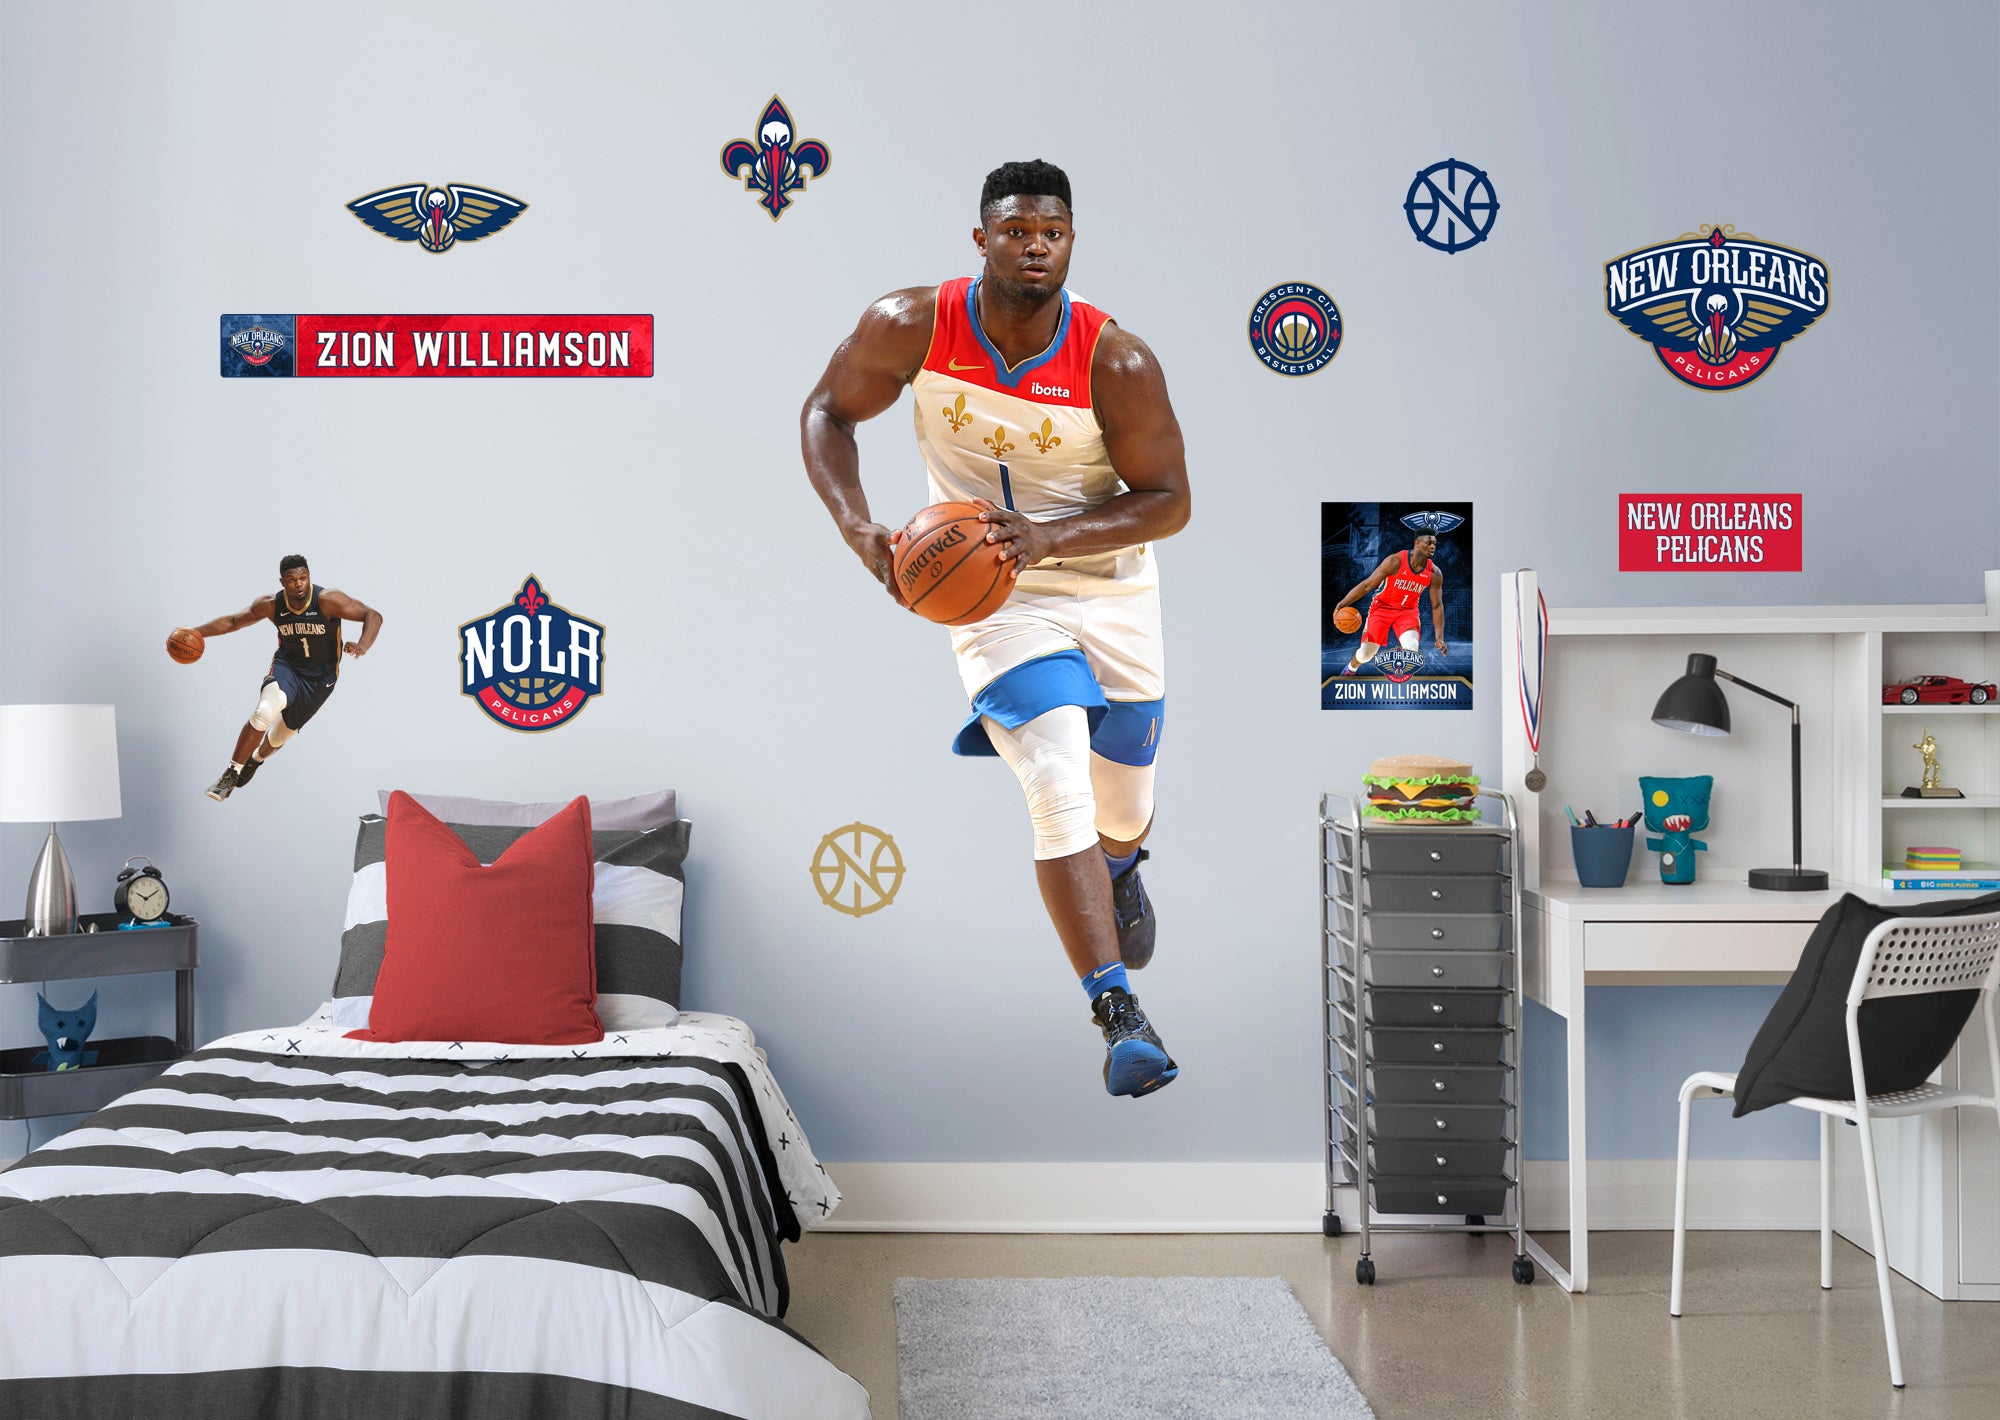 Zion Williamson 2021 City Jersey for New Orleans Pelicans - Officially Licensed NBA Removable Wall Decal Life-Size Athlete + 11